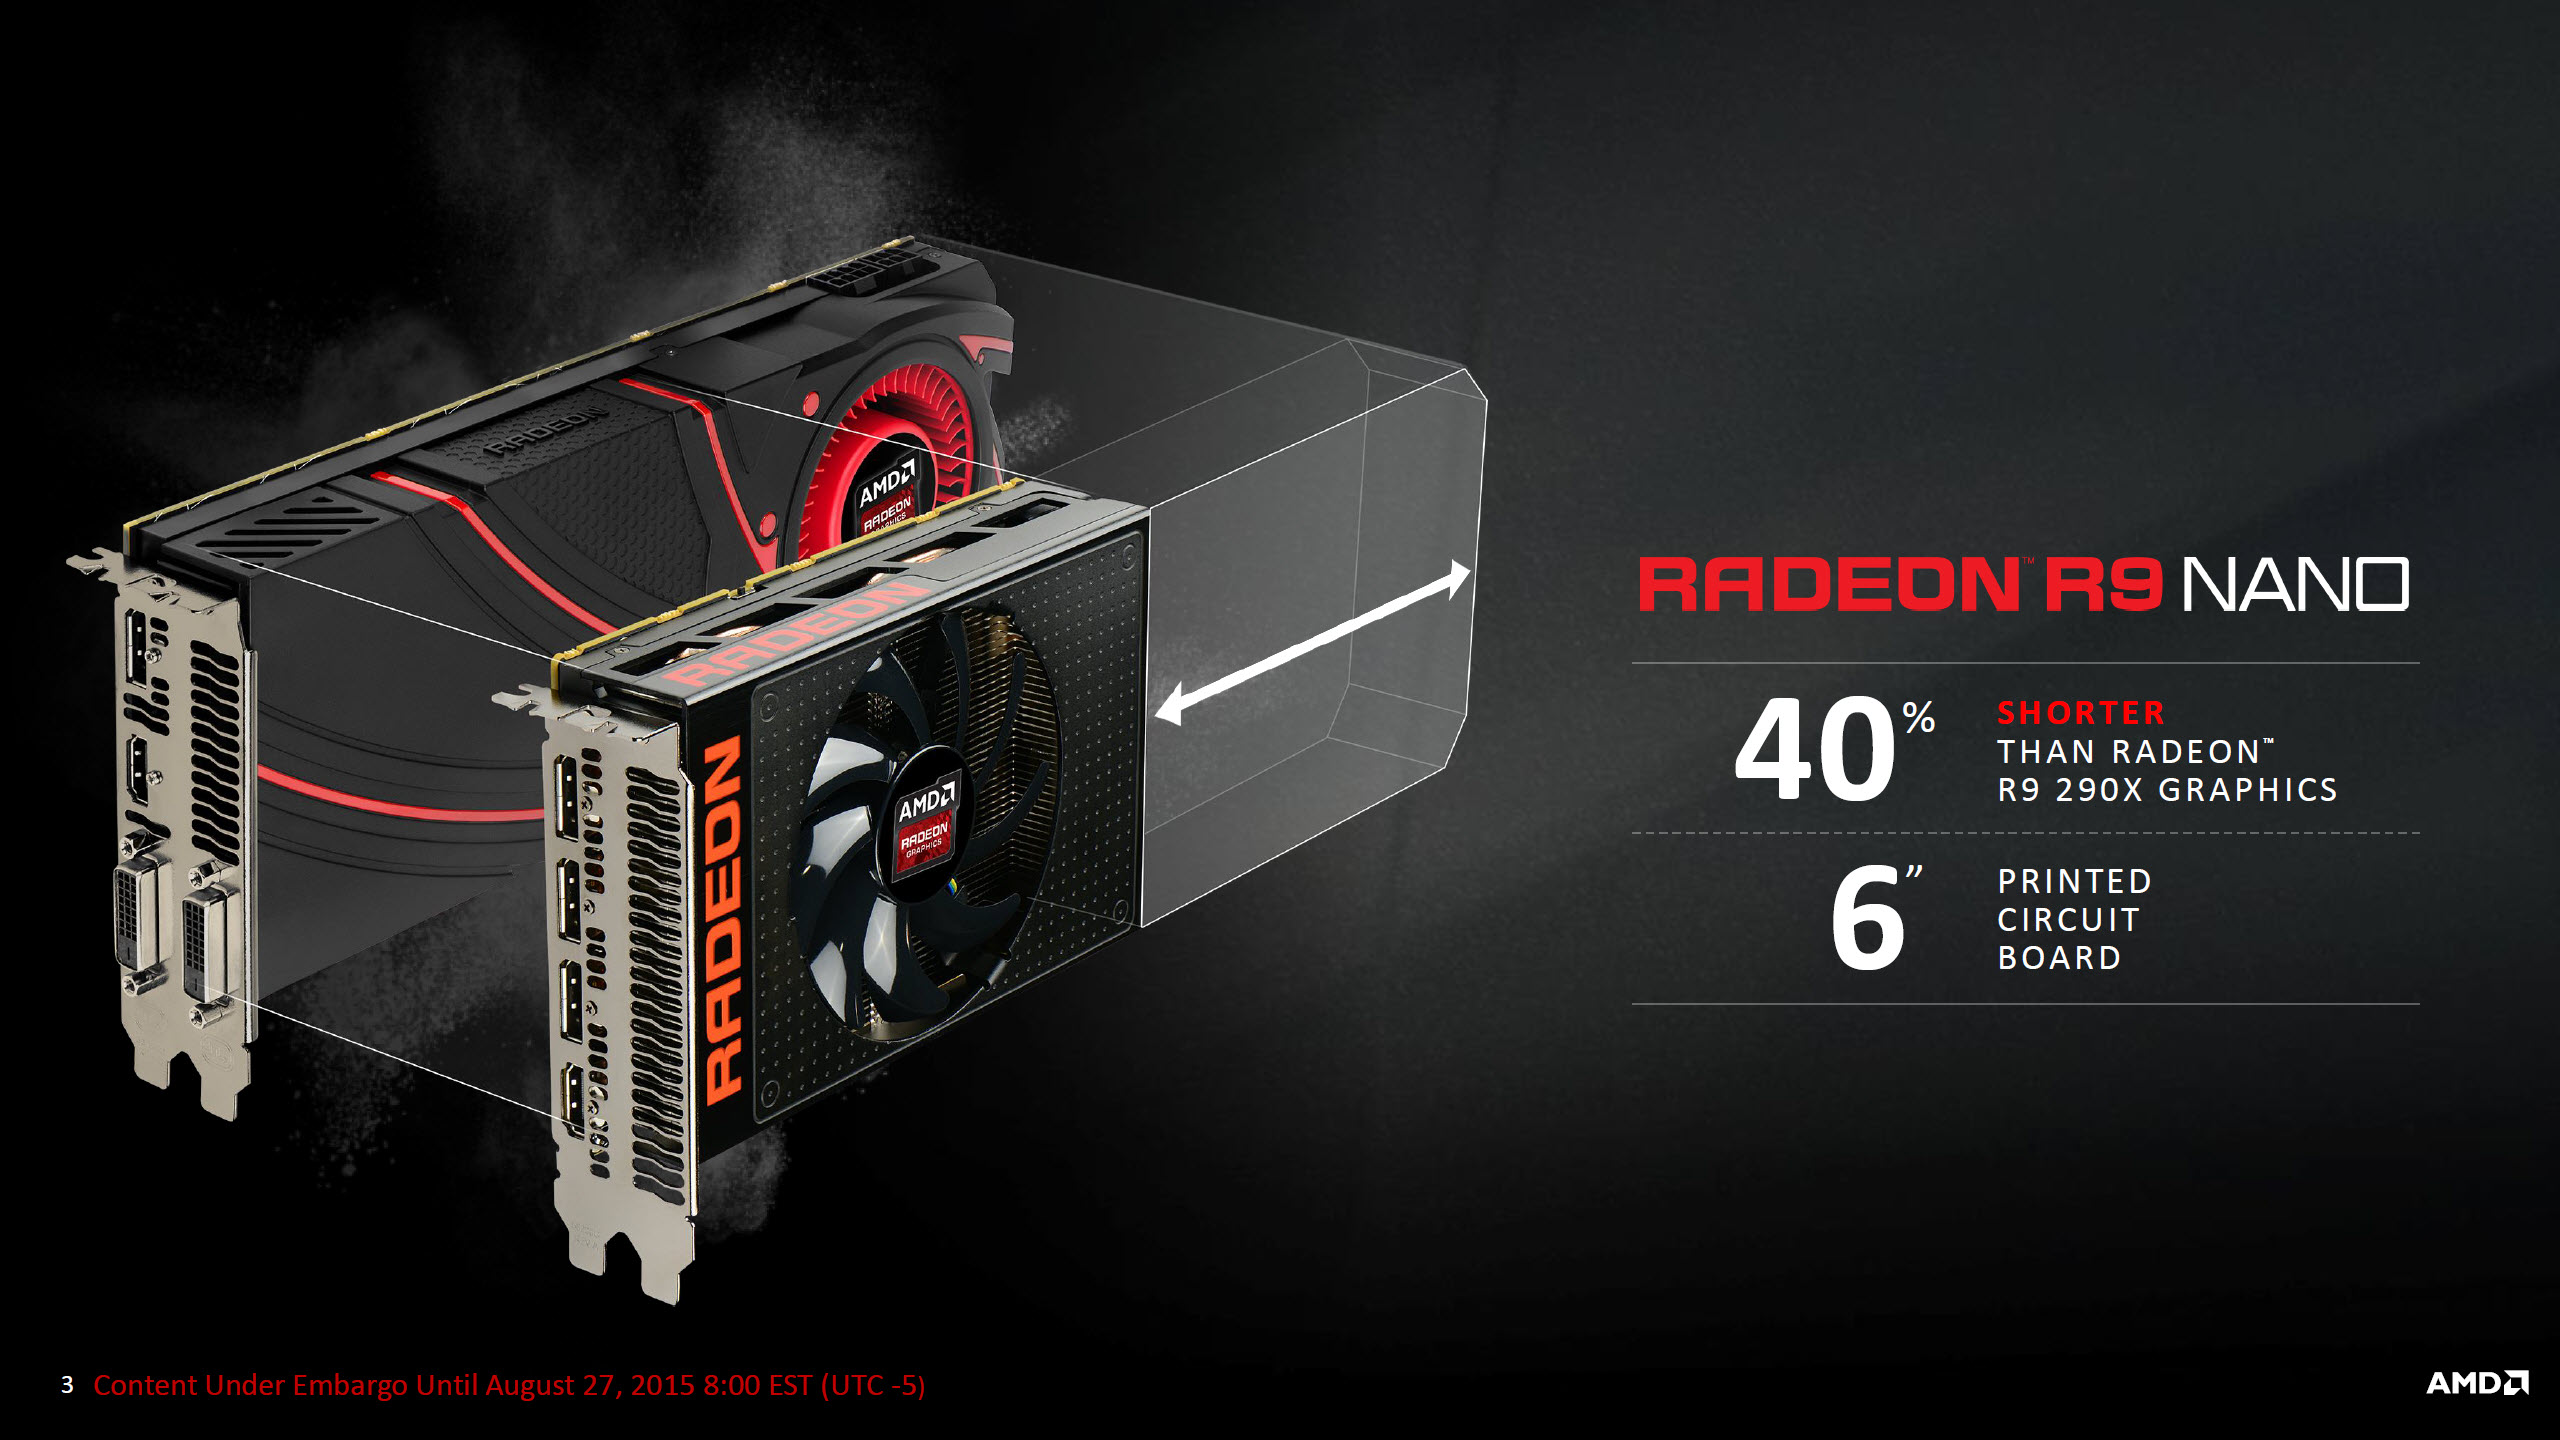 AMD Officially Cuts Prices of R9 Nano – Now Priced at $499